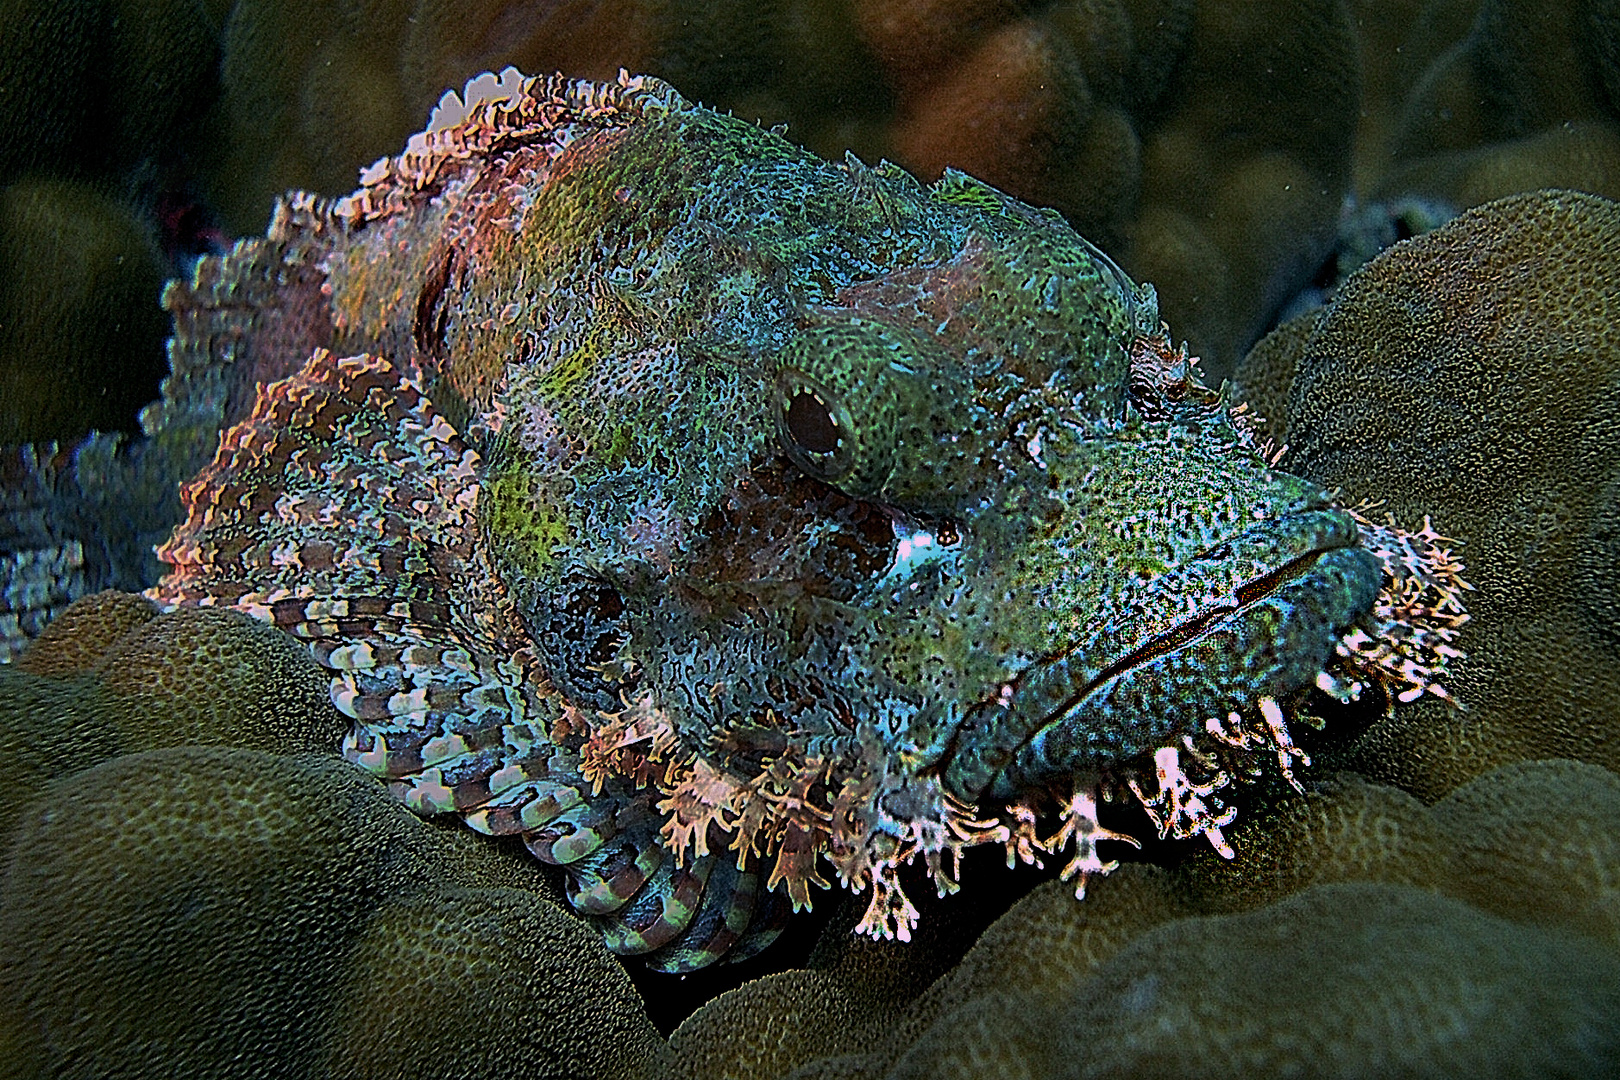 Scorpion fish at the coral floor